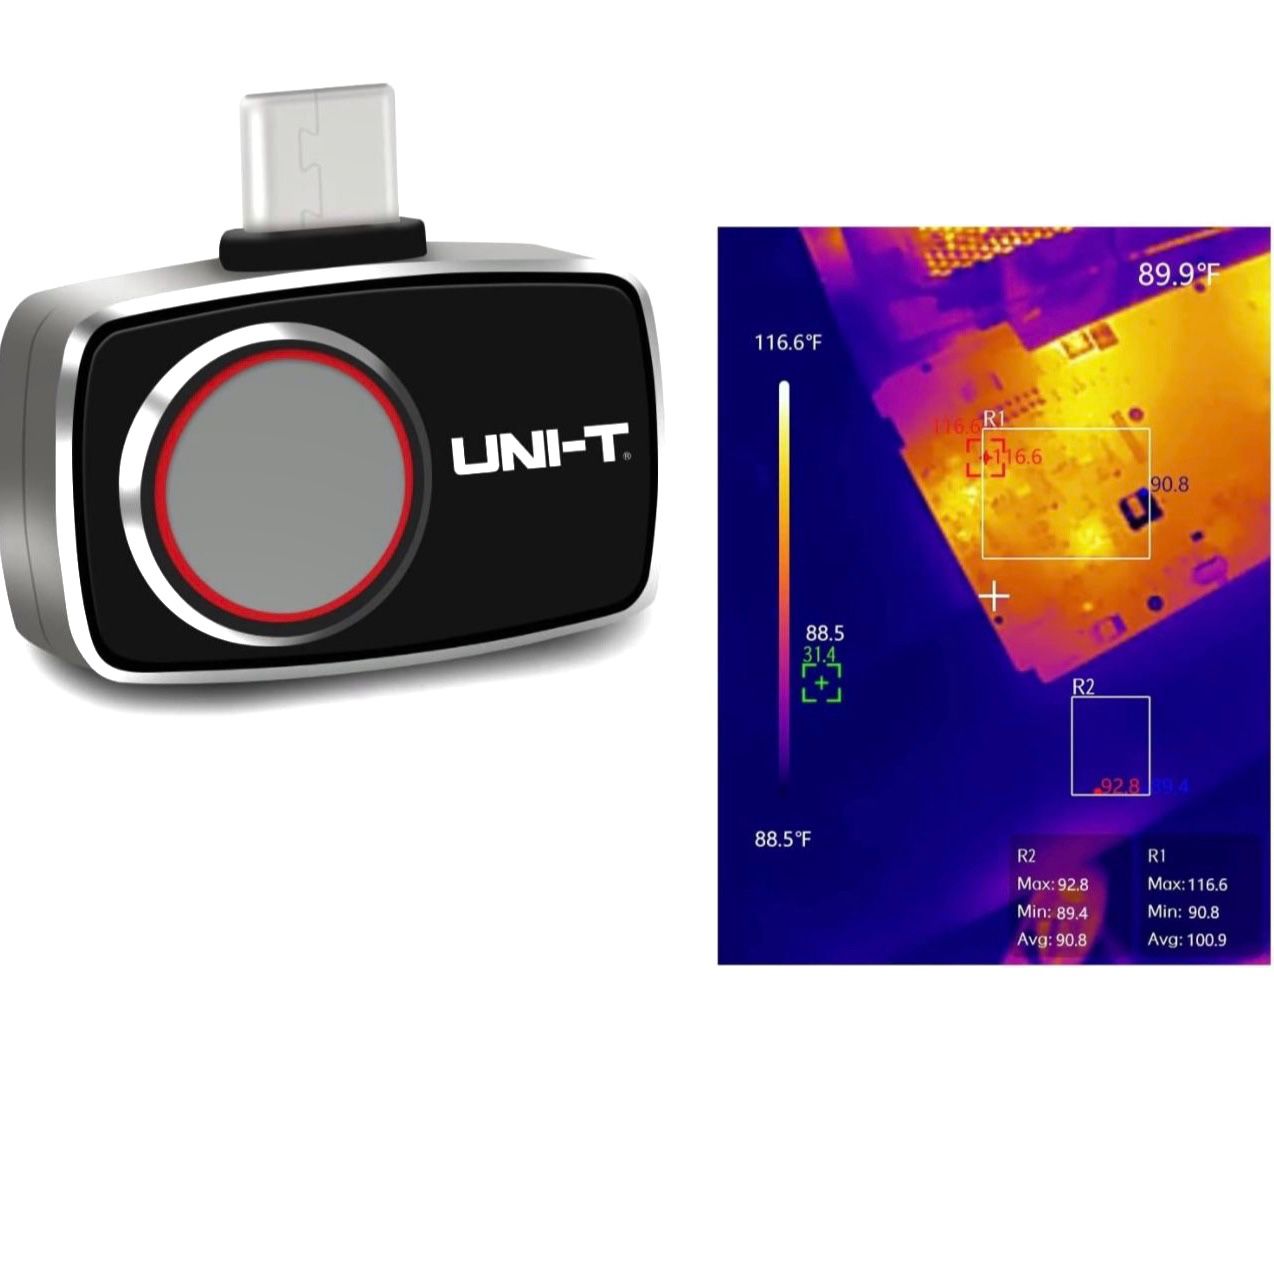 UNI-T Thermal Camera Android USB-C 256×192 IR High Resolution Infrared Cameras Thermal Imaging Camera for Smartphones, Thermal Imager 7 Palettes 25Hz